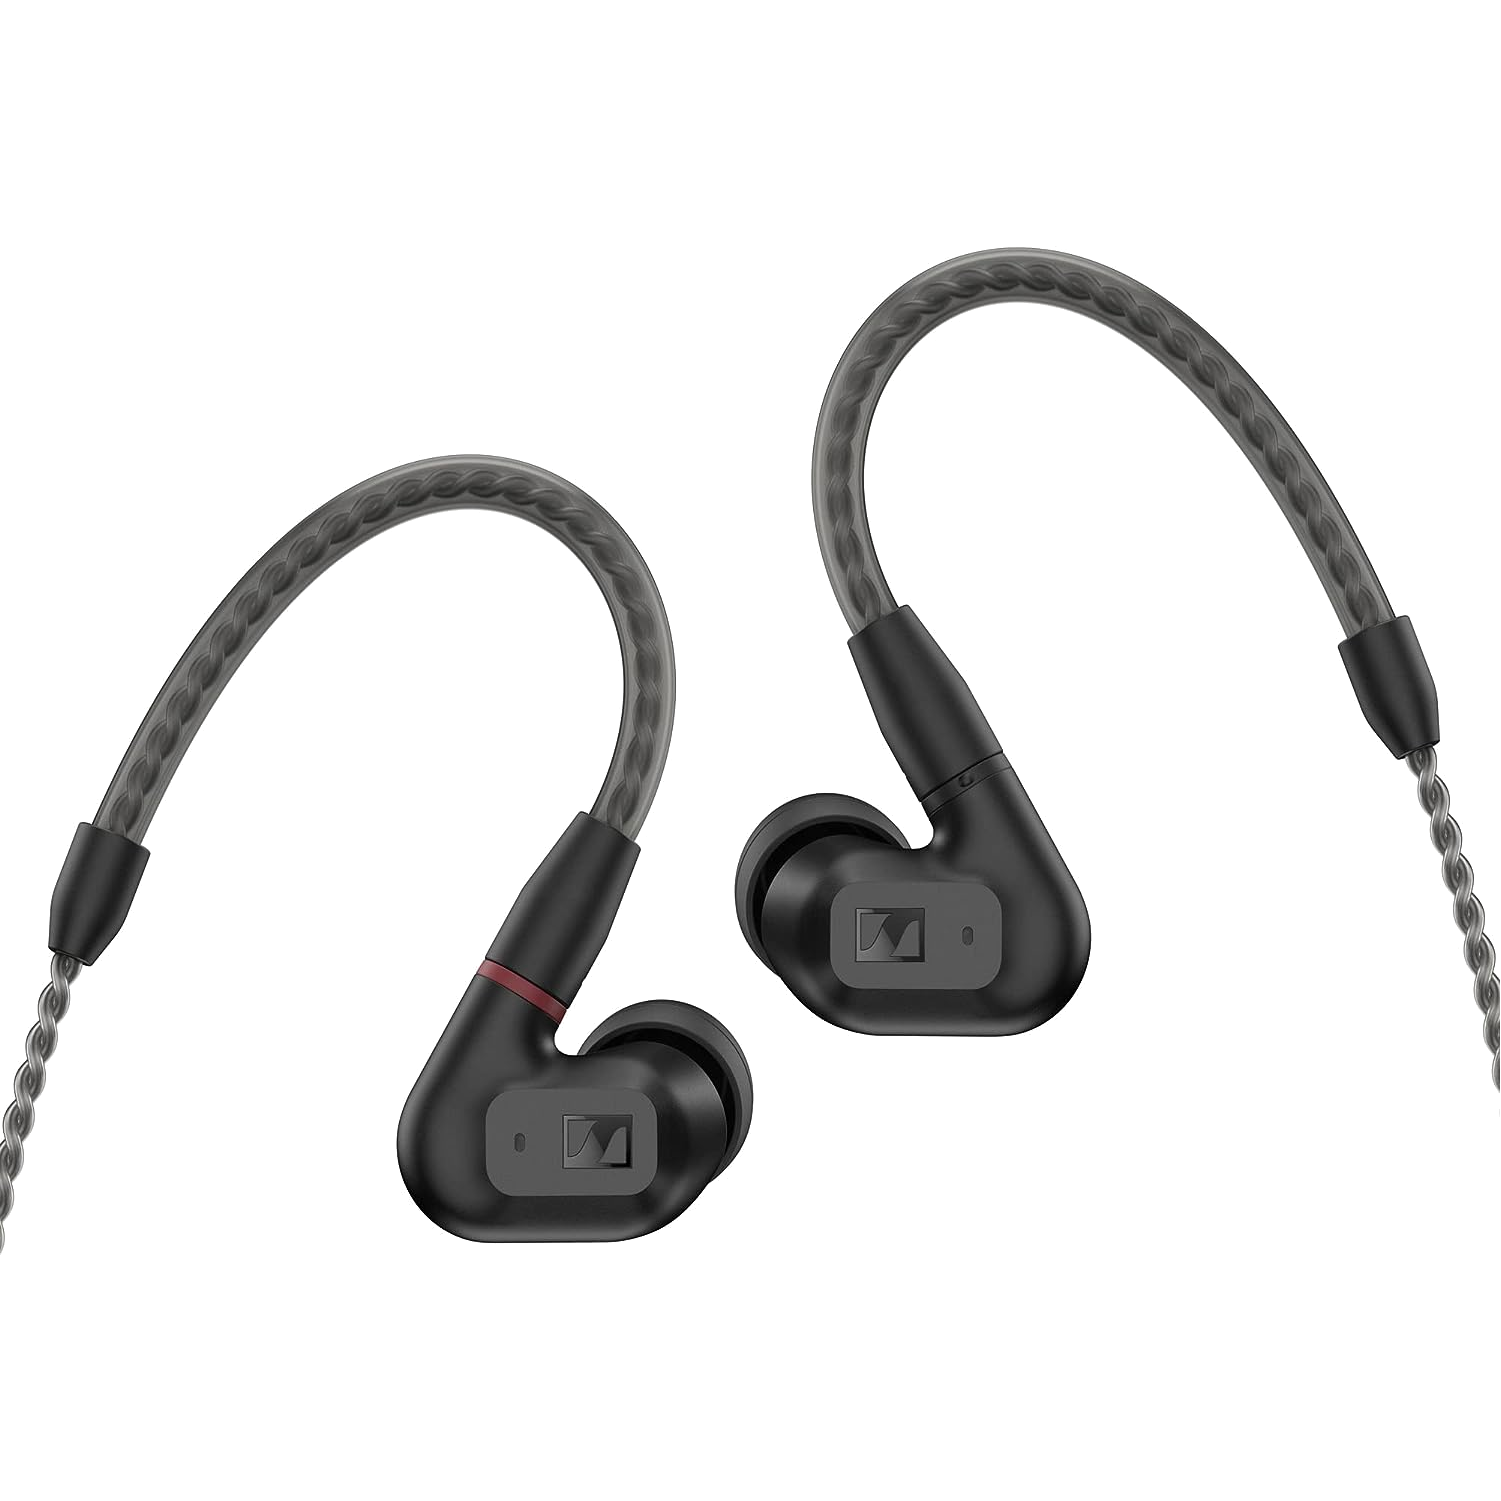 Sennheiser IE 200 Wired Earbuds in black shown on a transparent background.